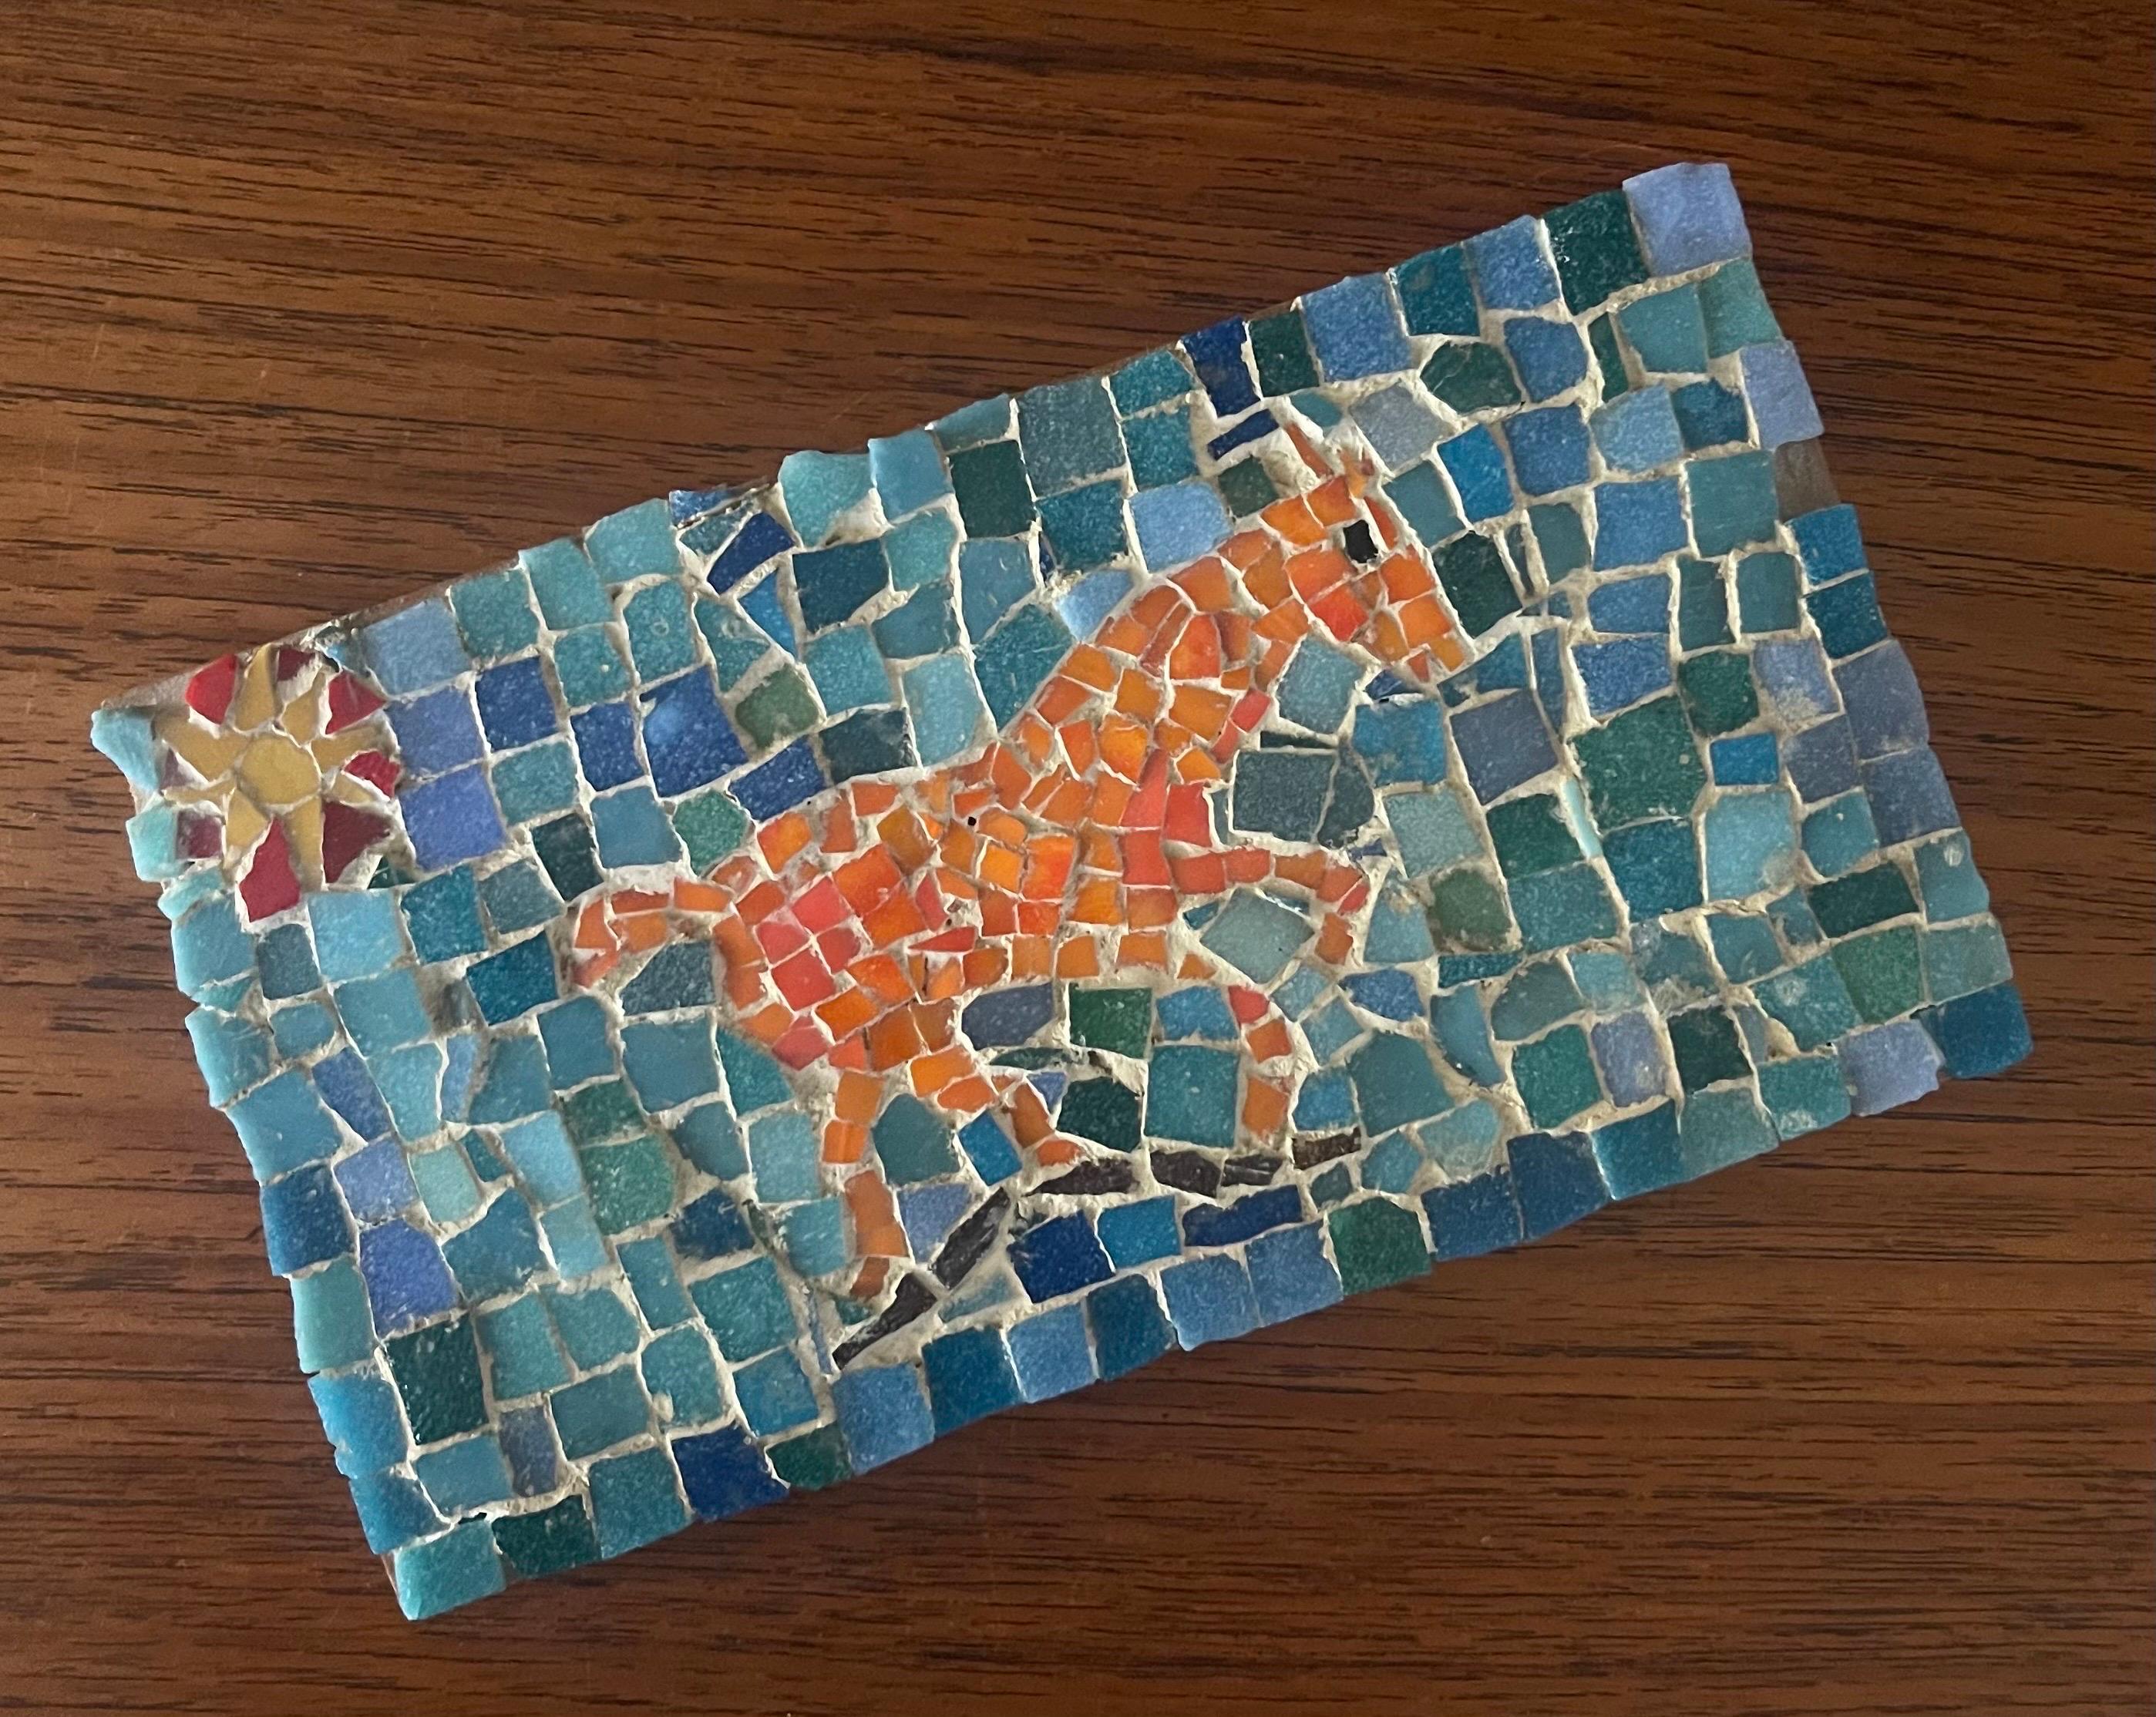 A very well done MCM horse scene mosaic on board by David Lavington, circa 1970s. The bright and colorful piece is in good vintage condition with a few mosaic pieces missing on the right side and top (please see pictures) and measures 8